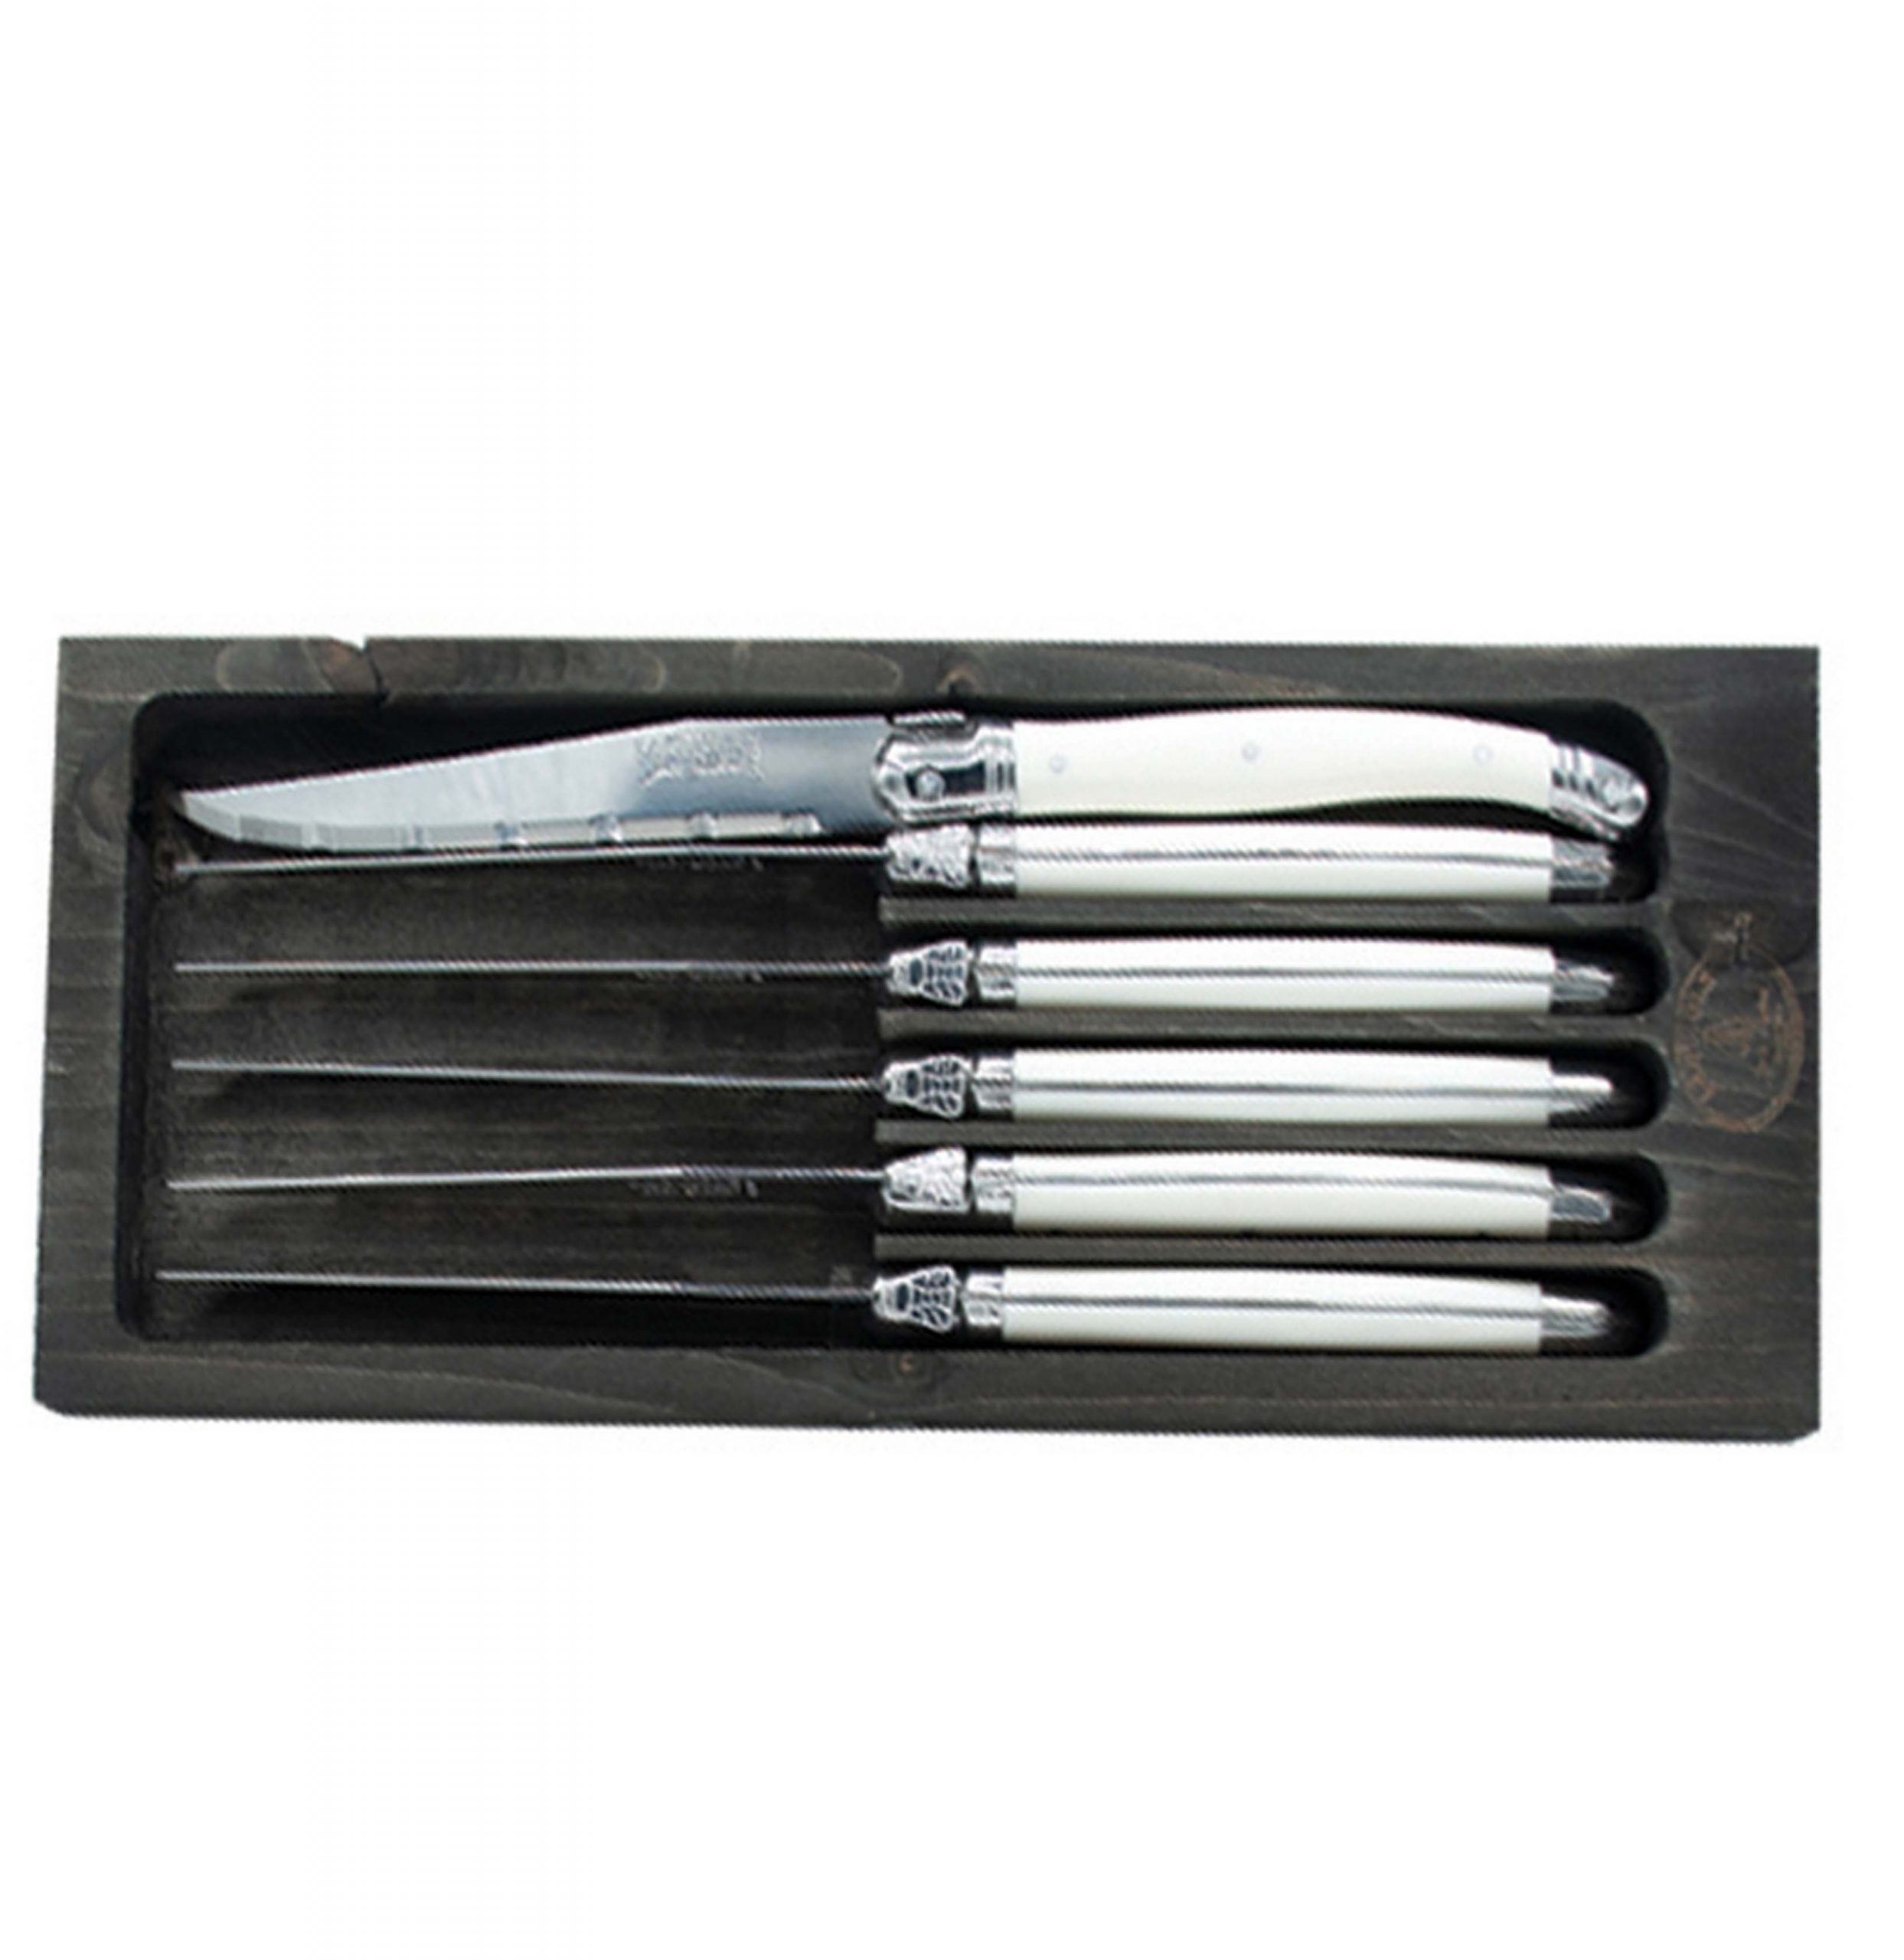 Laguiole Jean Dubost 6 Steak Knives with White Handles in Black Tray